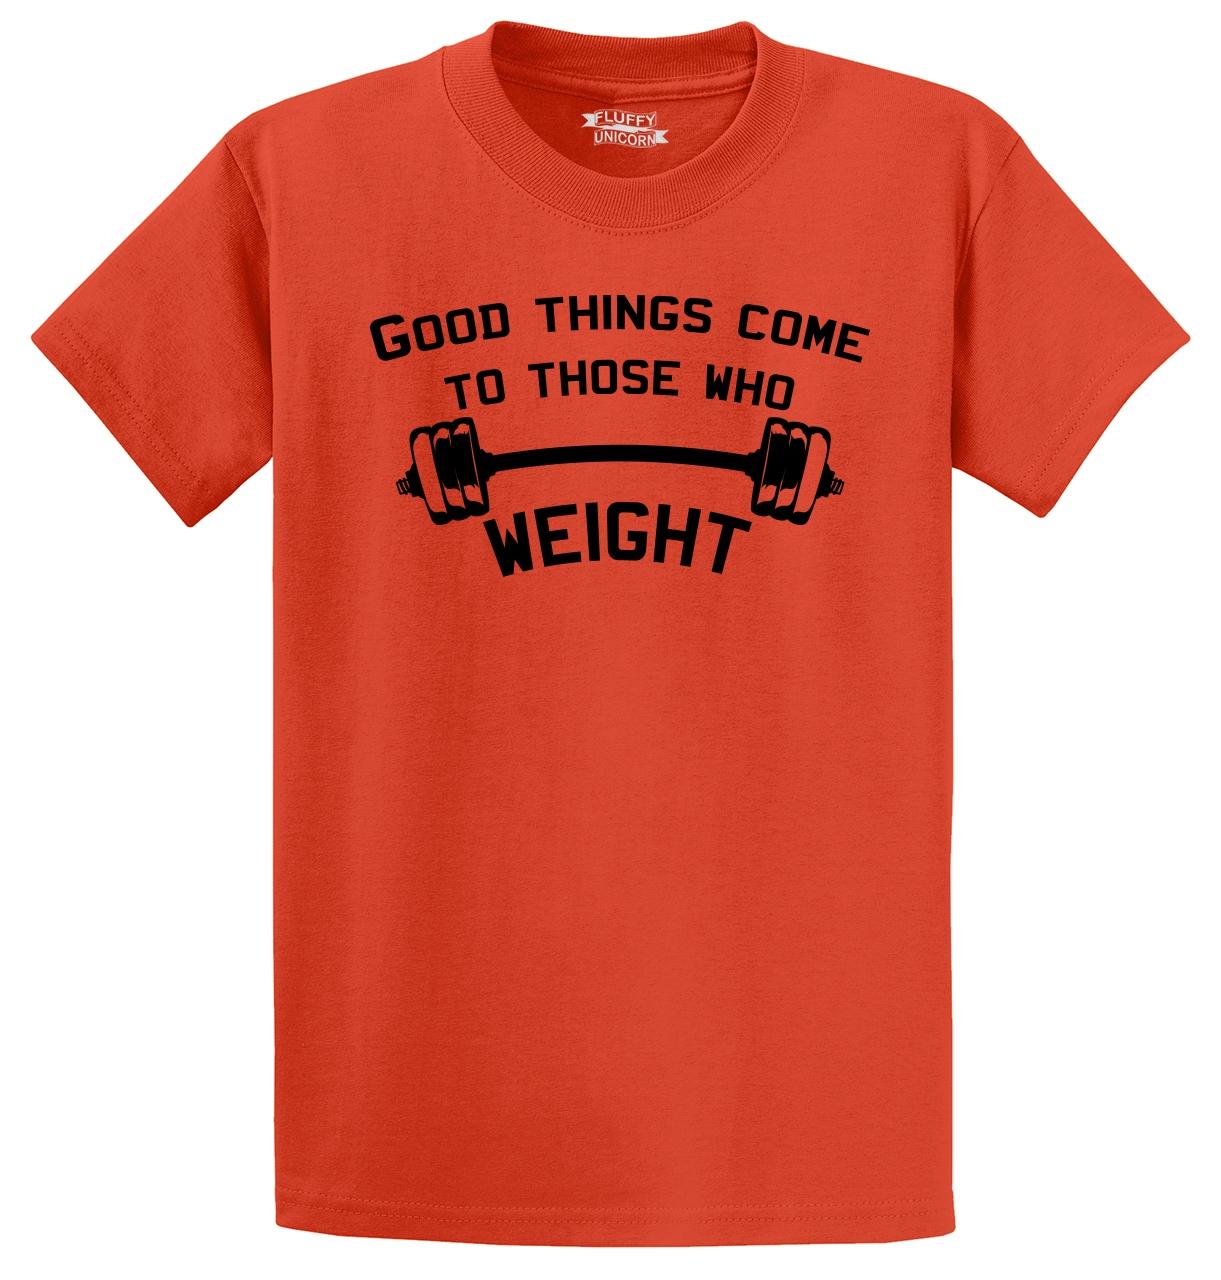 men's premium t-sh Exercise is a great way to justify binge eating after exercising Mens funny gym t-shirt slogan tee workout hilarious